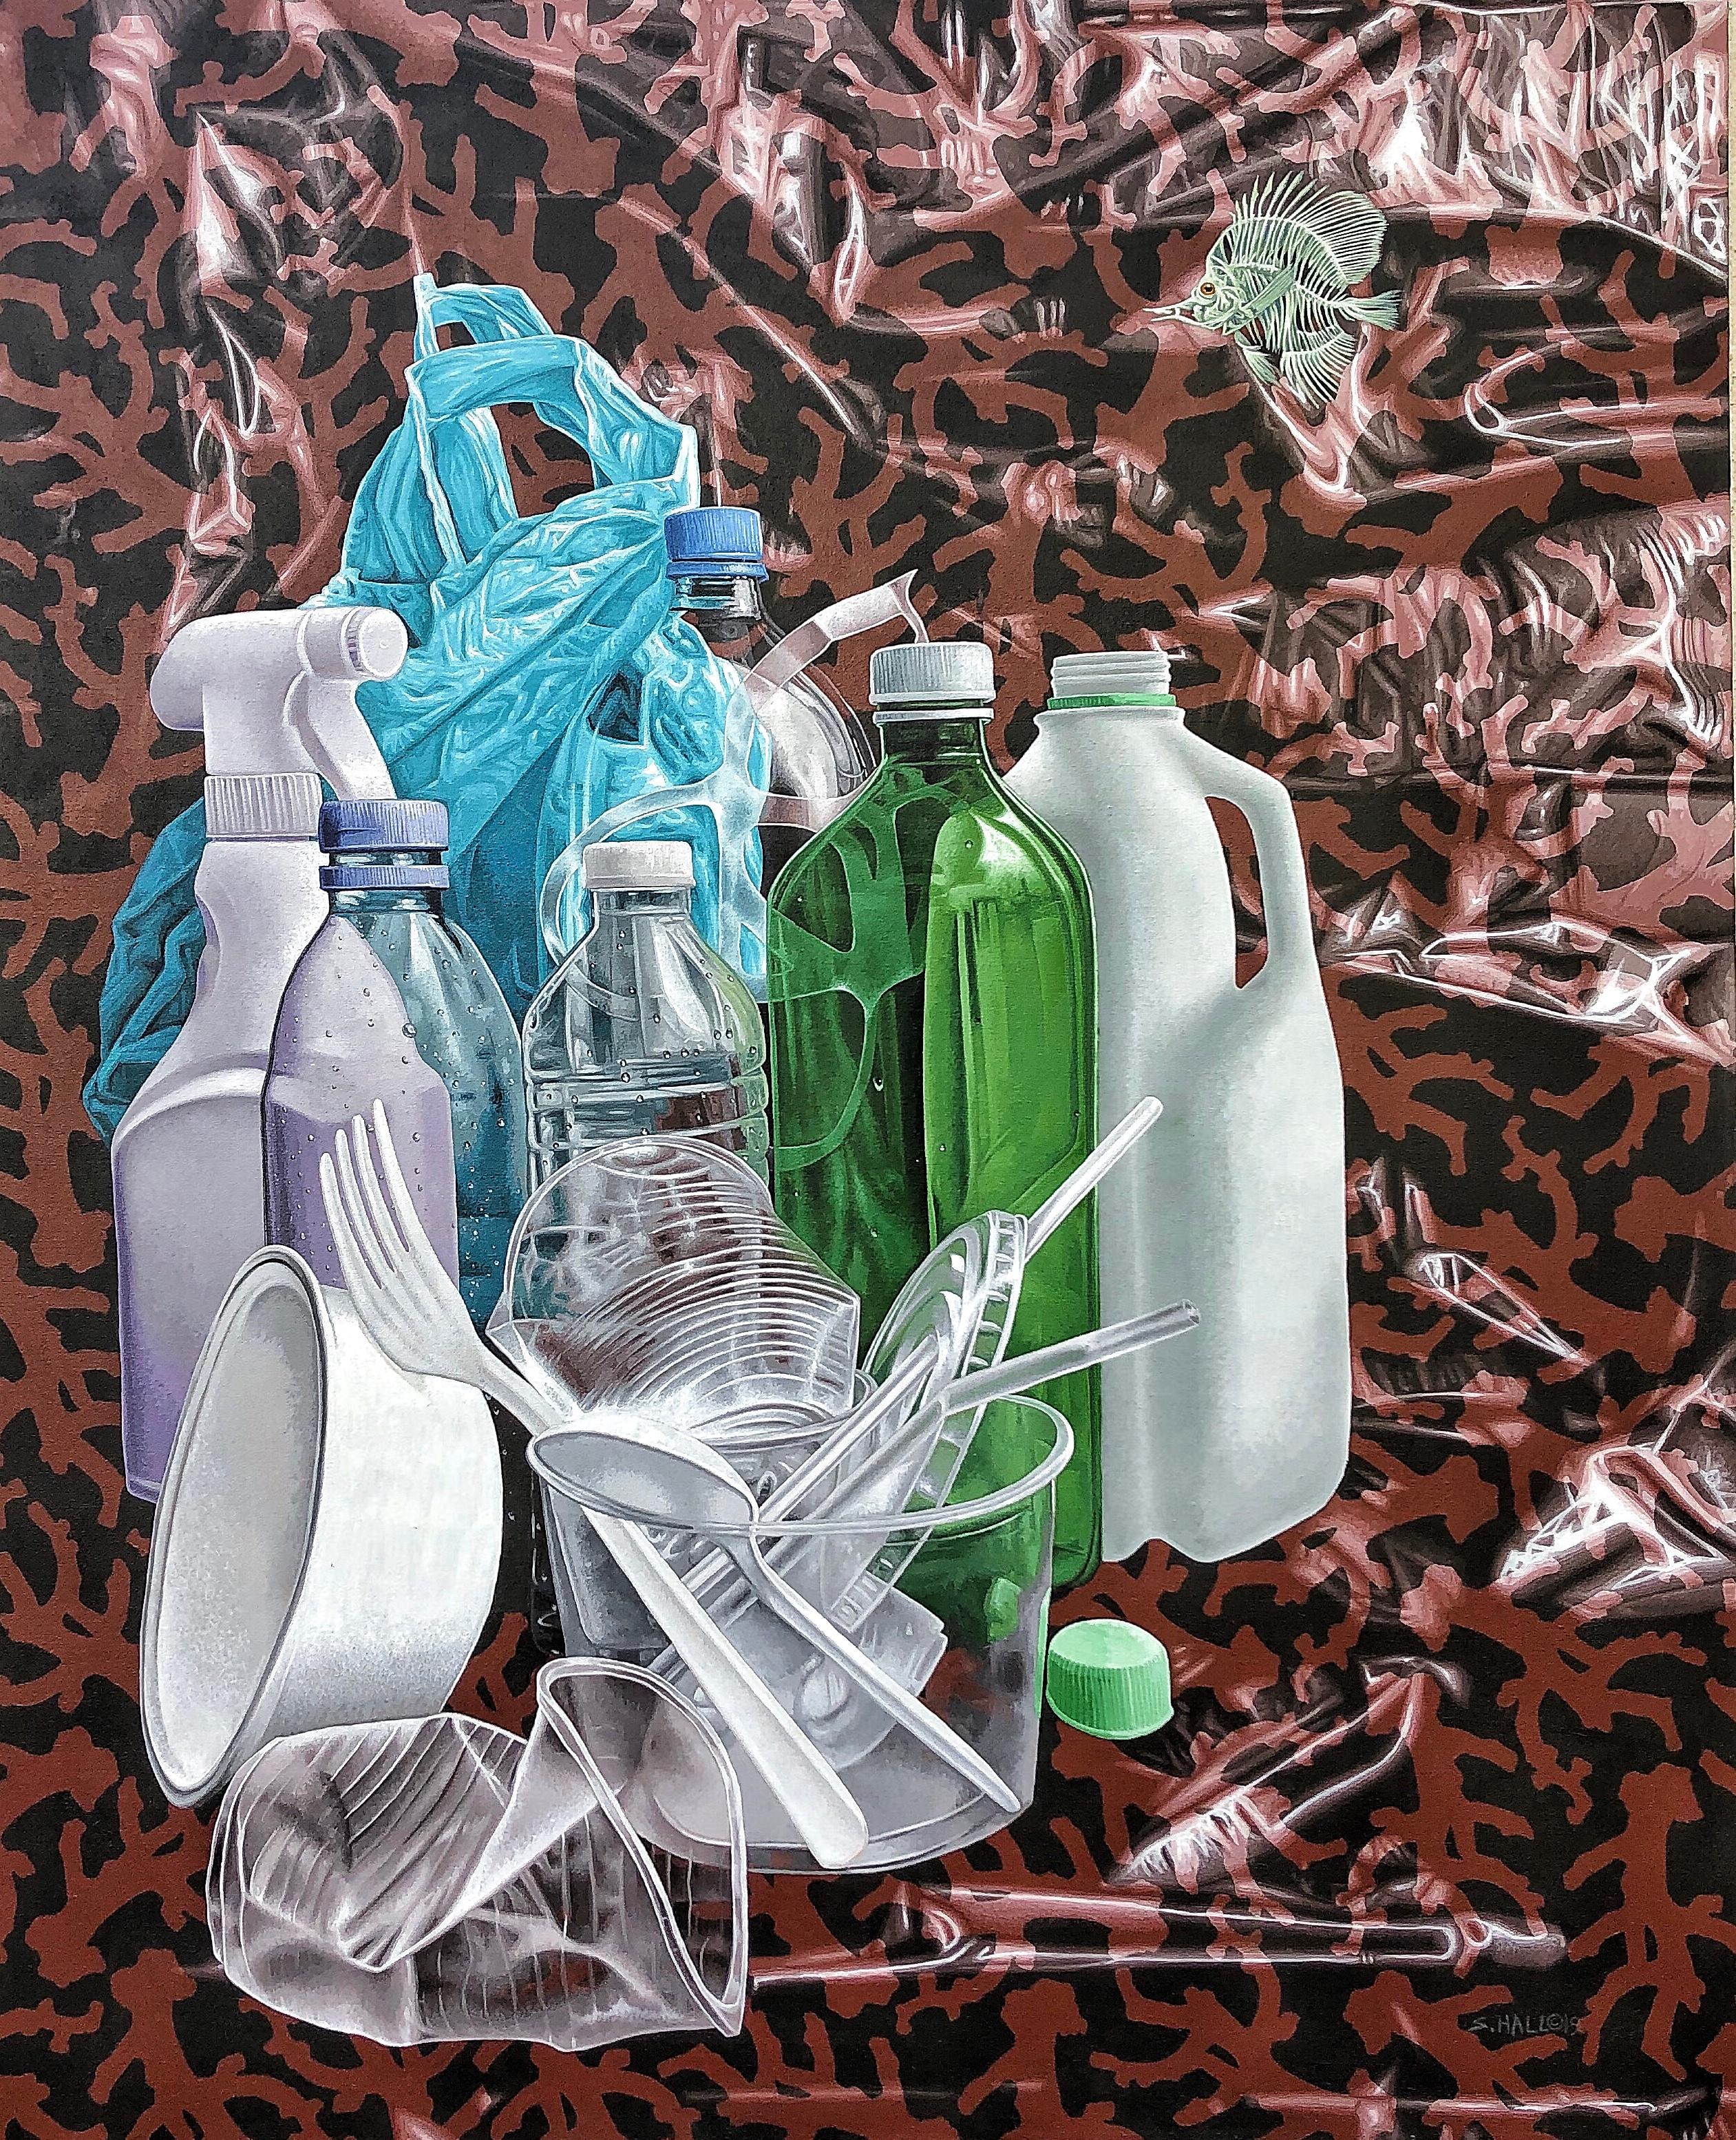 Stephen Hall Still-Life Painting - Acrylic Painting on Canvas: 'Fat Free Ocean'